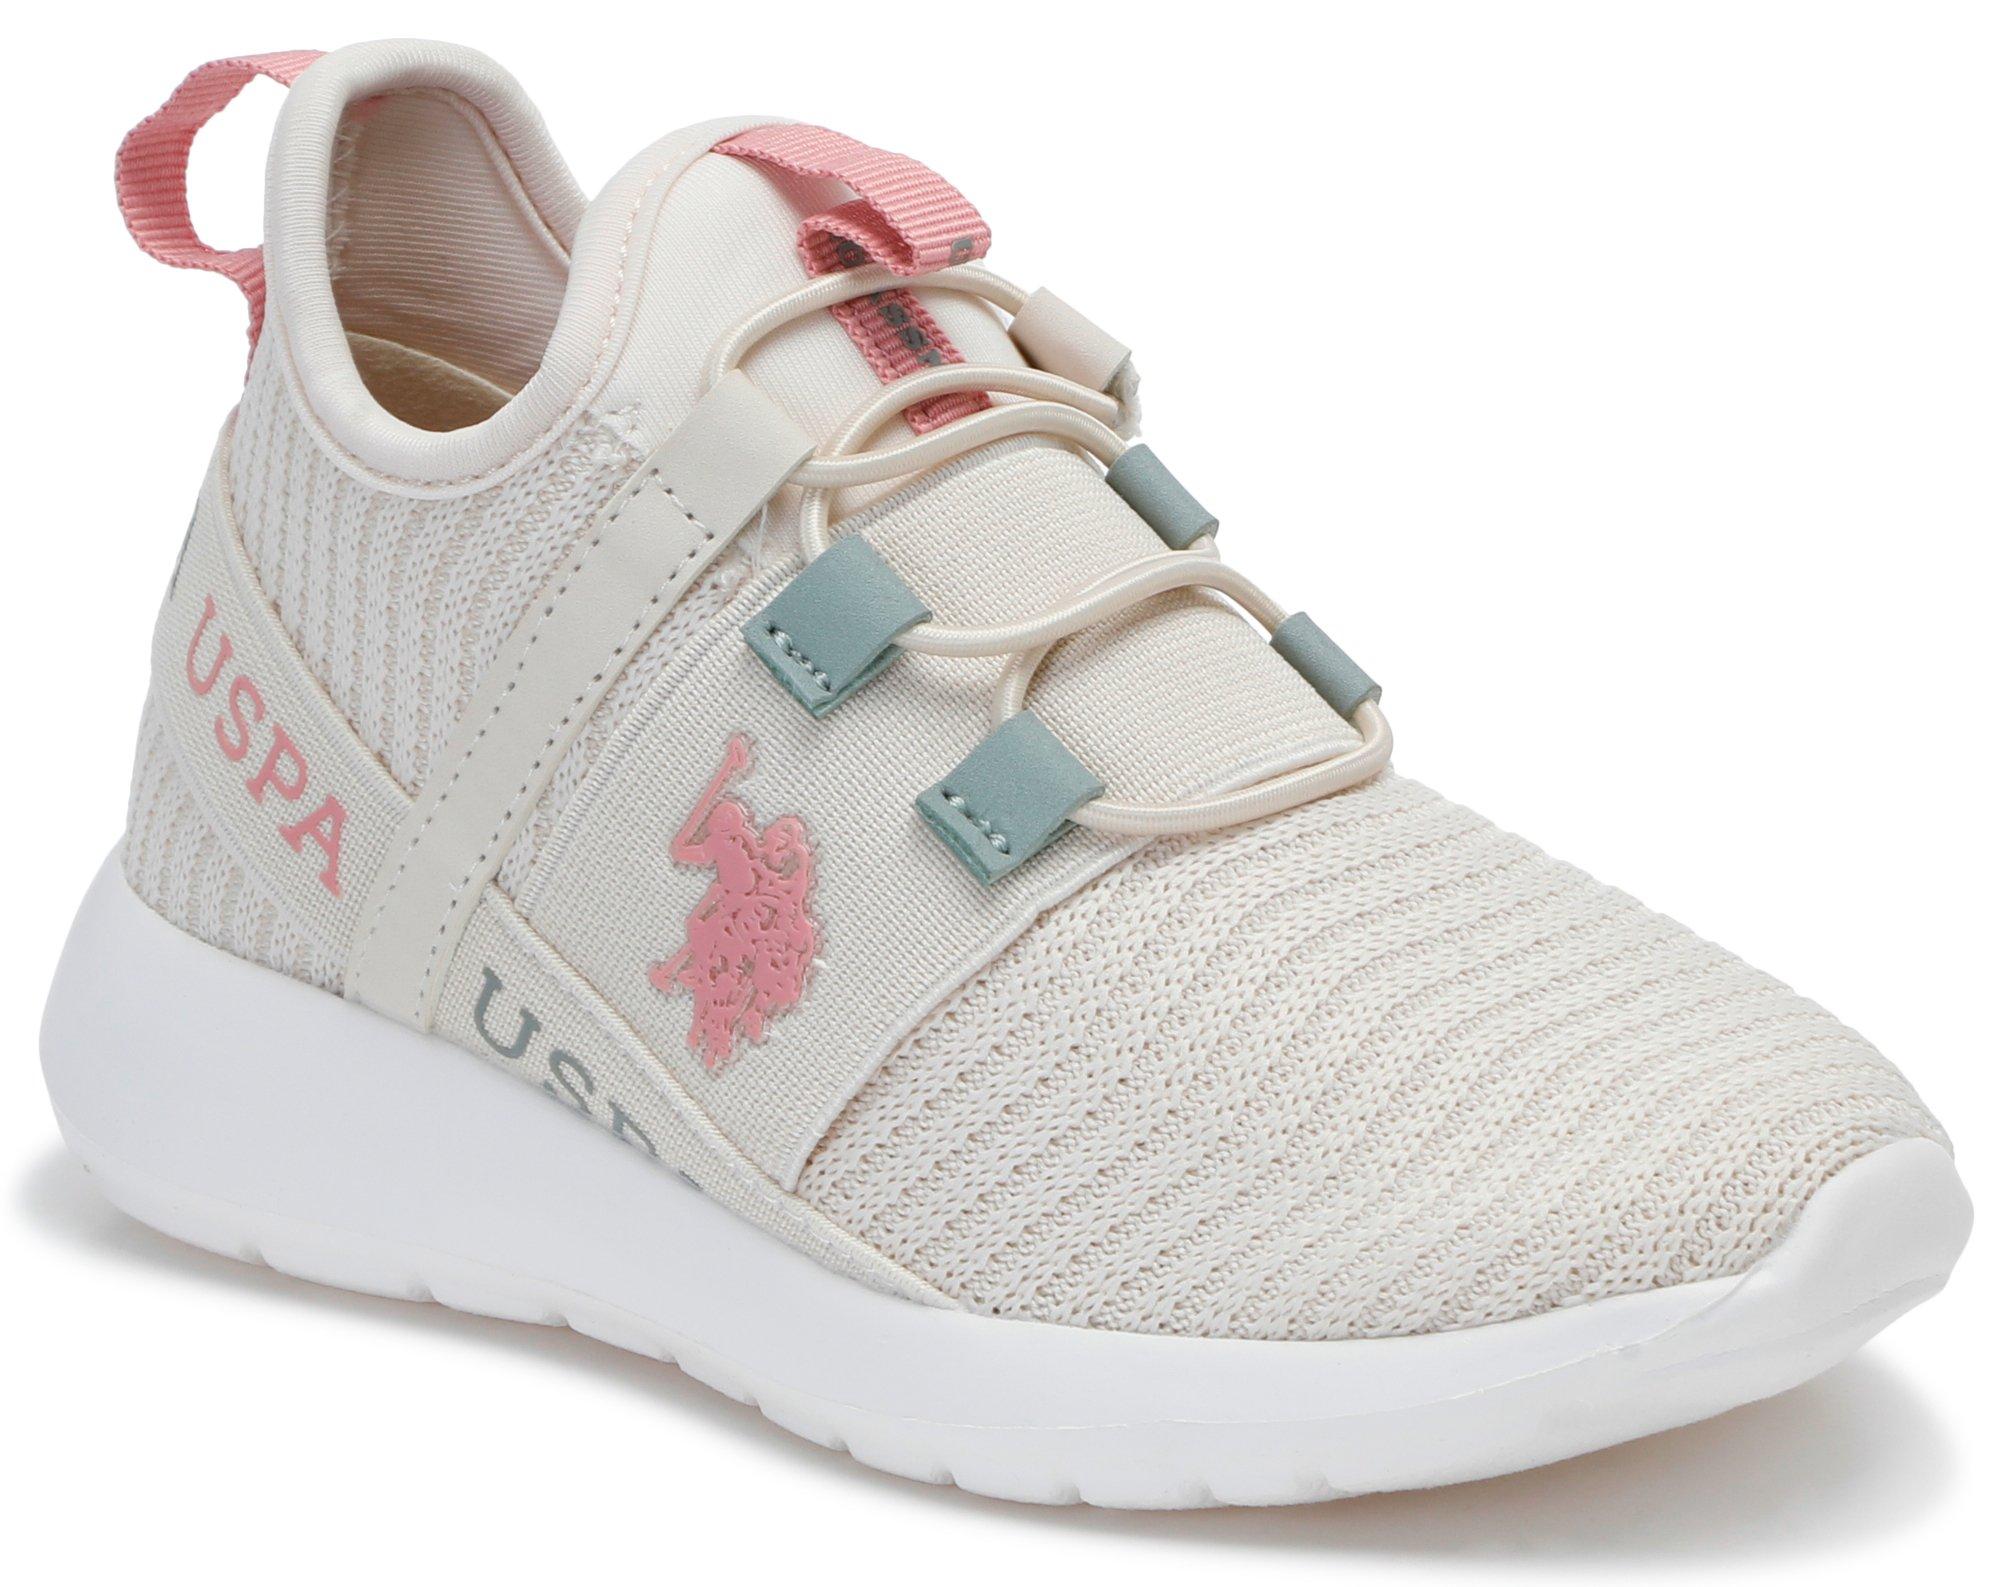 Girls Knit Athletic Sneakers